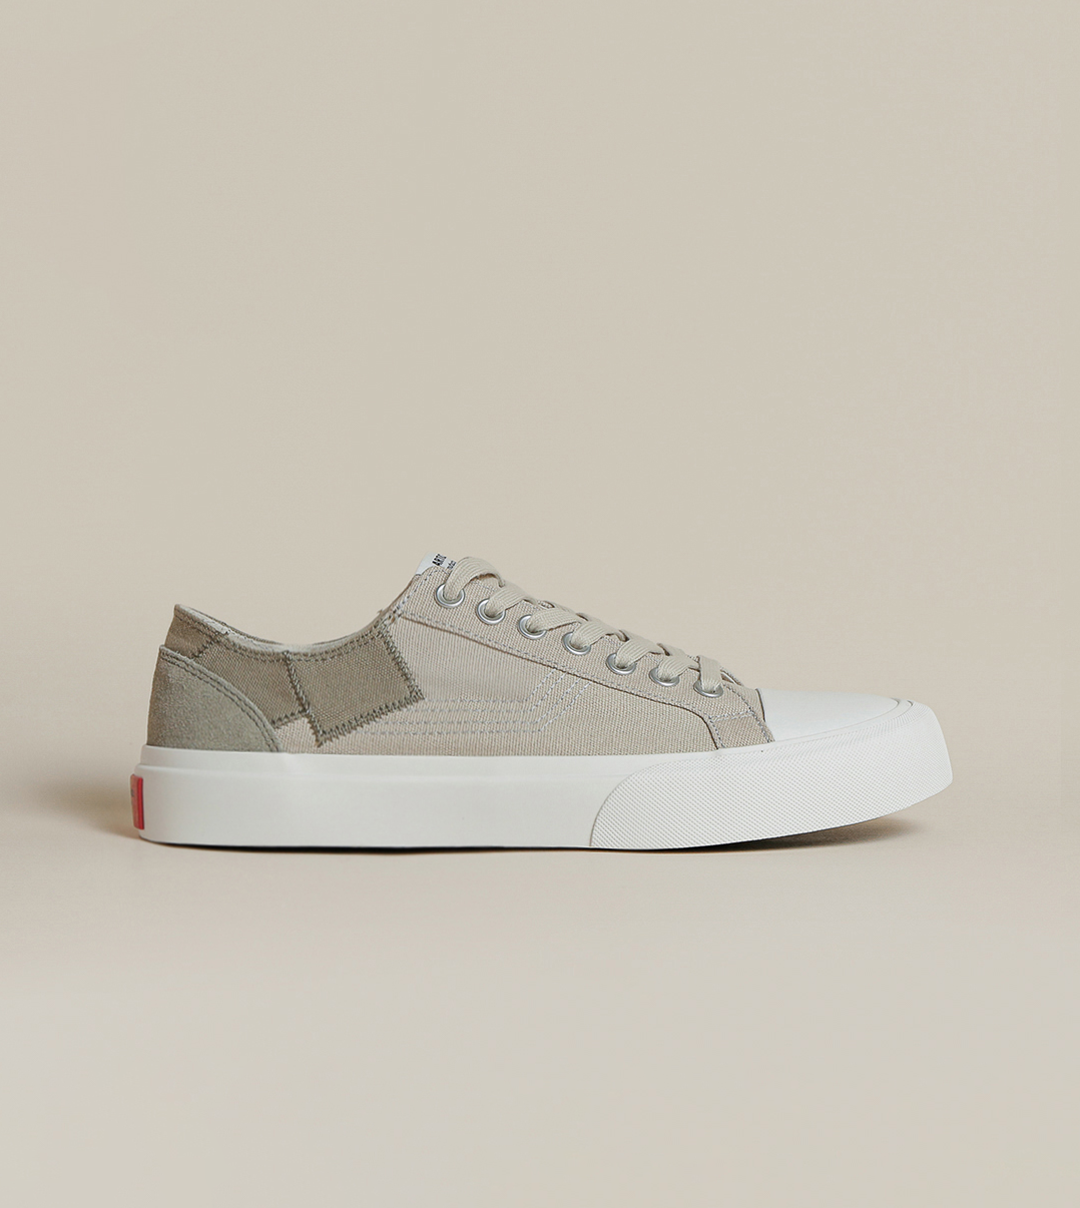 O.G. CLASSIC PATCHWORK KHAKI SNEAKERS